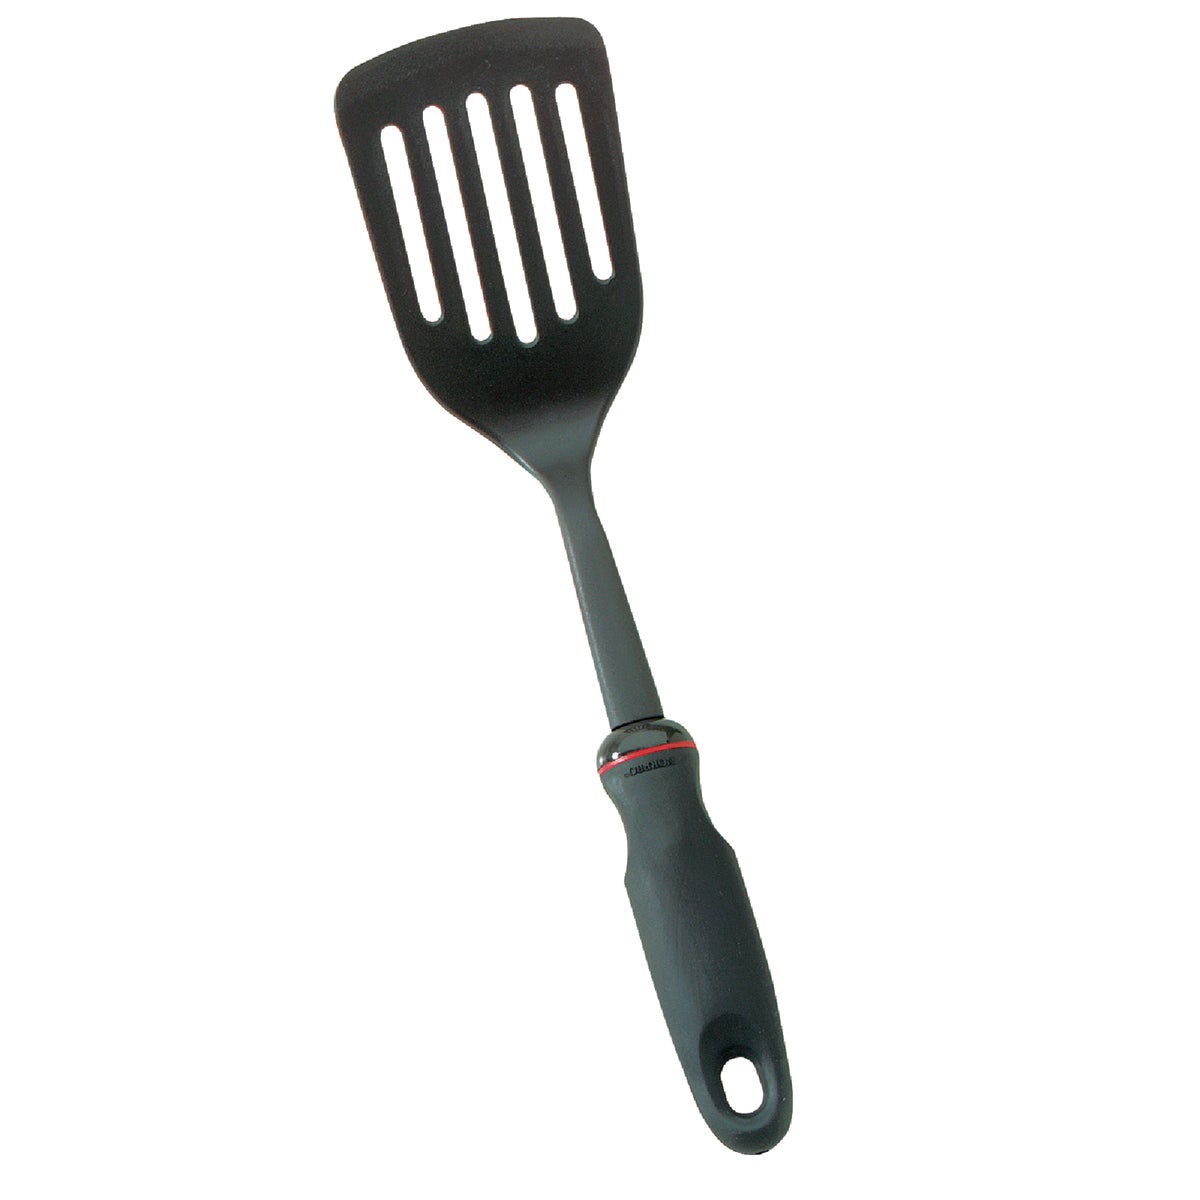 Item 631922, Black nylon turner is perfect for nonstick cookware and stir frying.